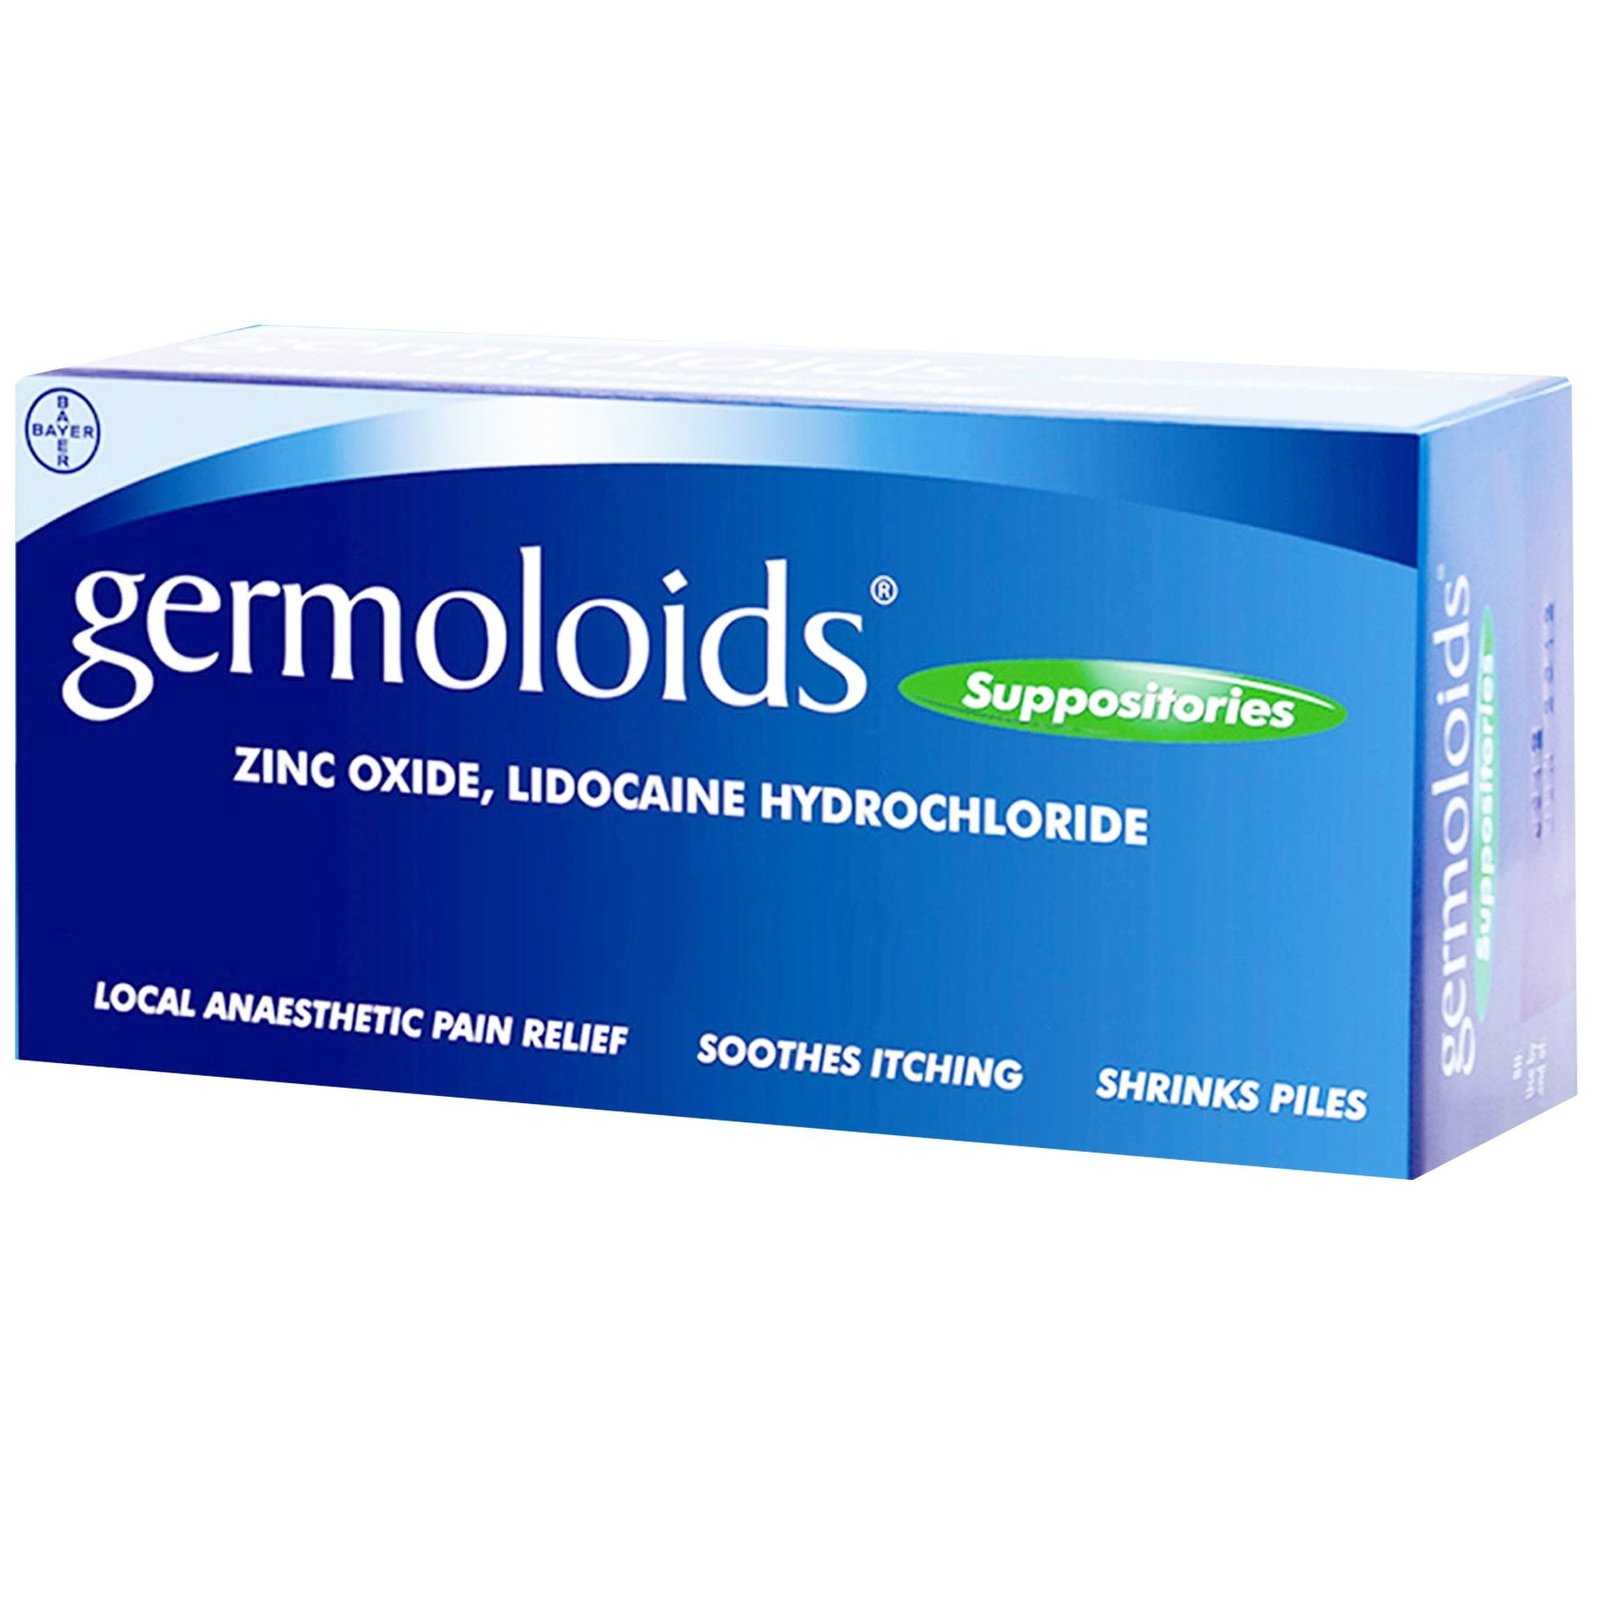 https://www.pharmacy24hours.co.uk/wp-content/uploads/2020/11/germoloids-suppositories-x-12-p12956-14135_zoom.jpg